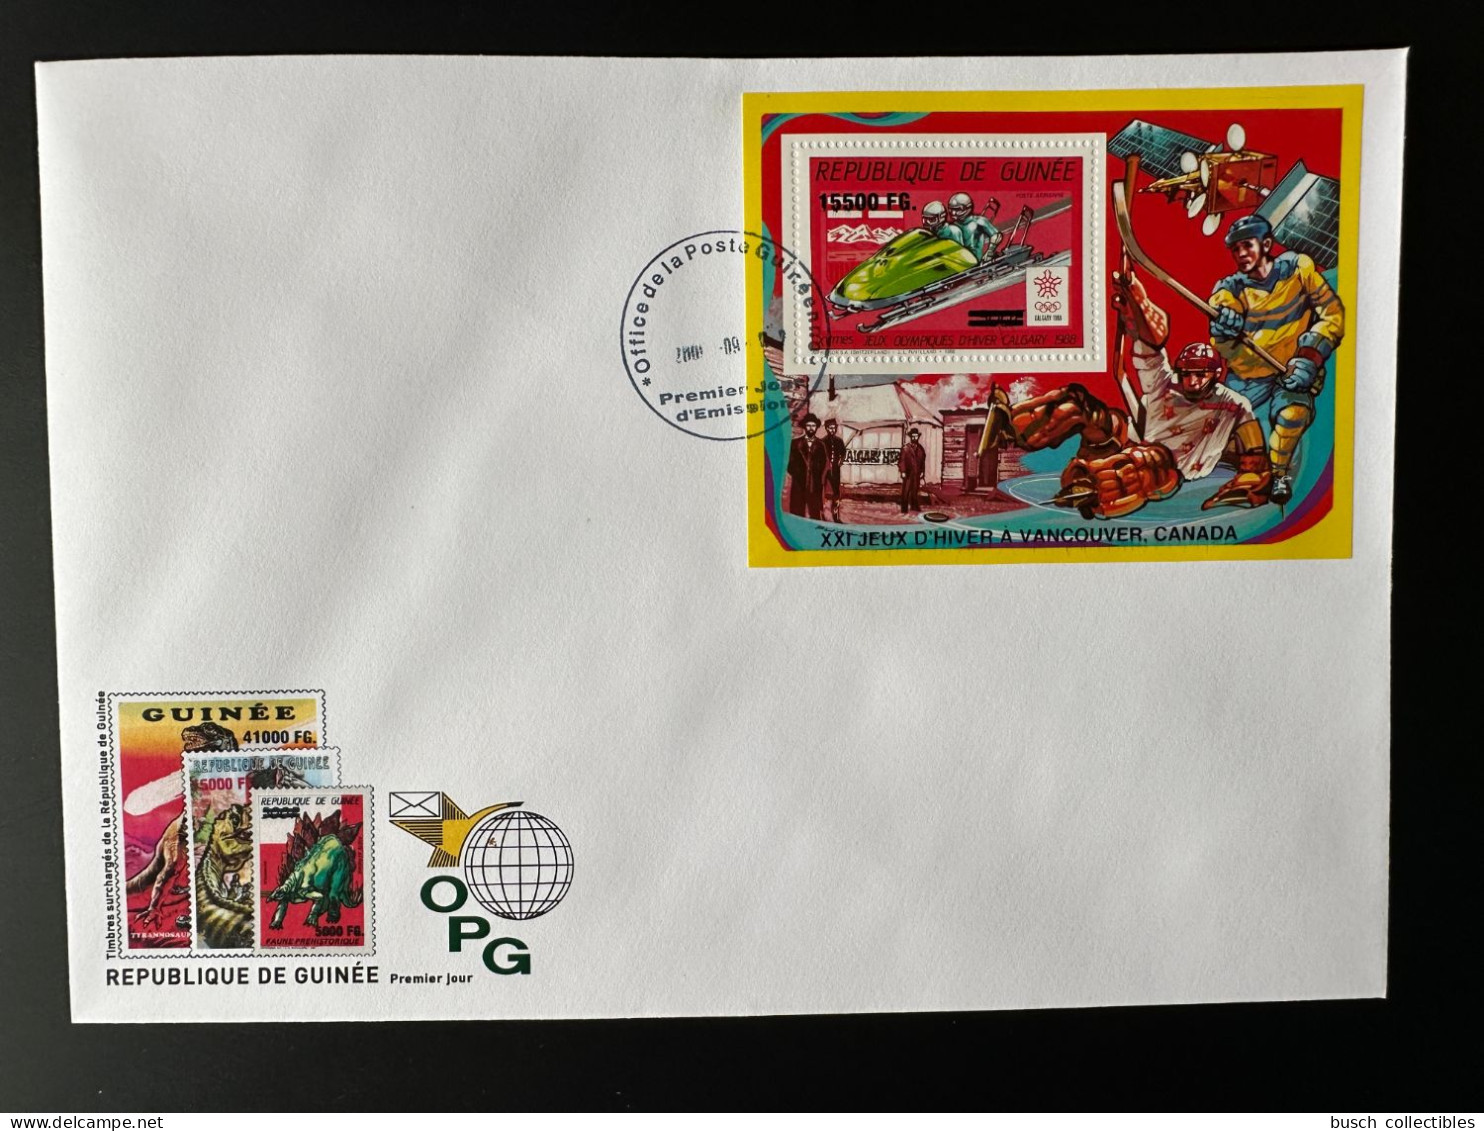 Guinée Guinea 2009 FDC Mi. Bl. 1727 Surch Overprint Winter Olympic Calgary 1988 Vancouver 2010 Jeux Olympiques Bobsleigh - Invierno 1988: Calgary